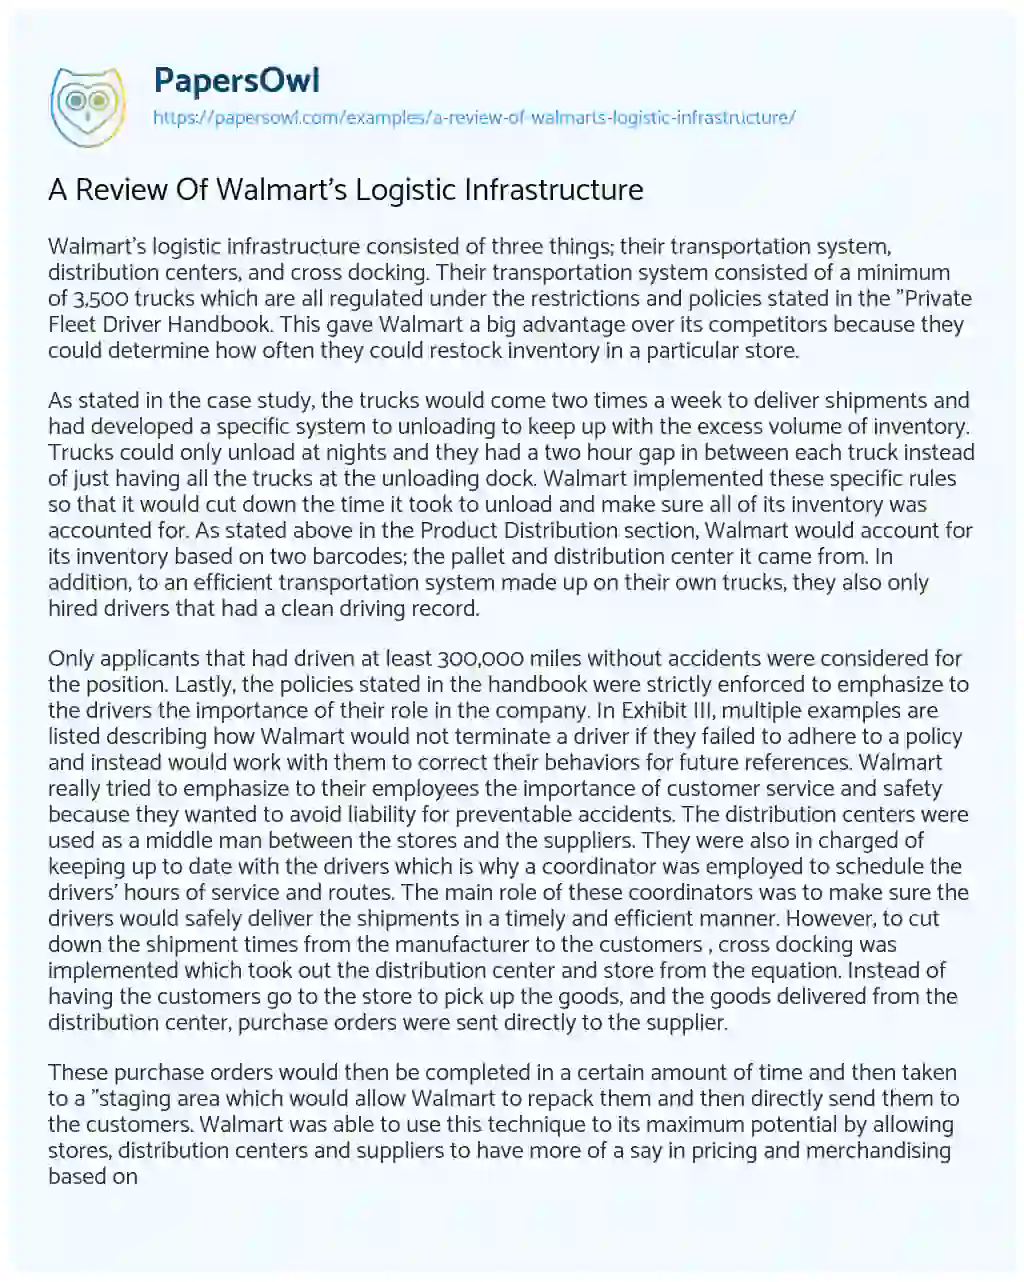 A Review of Walmart’s Logistic Infrastructure essay